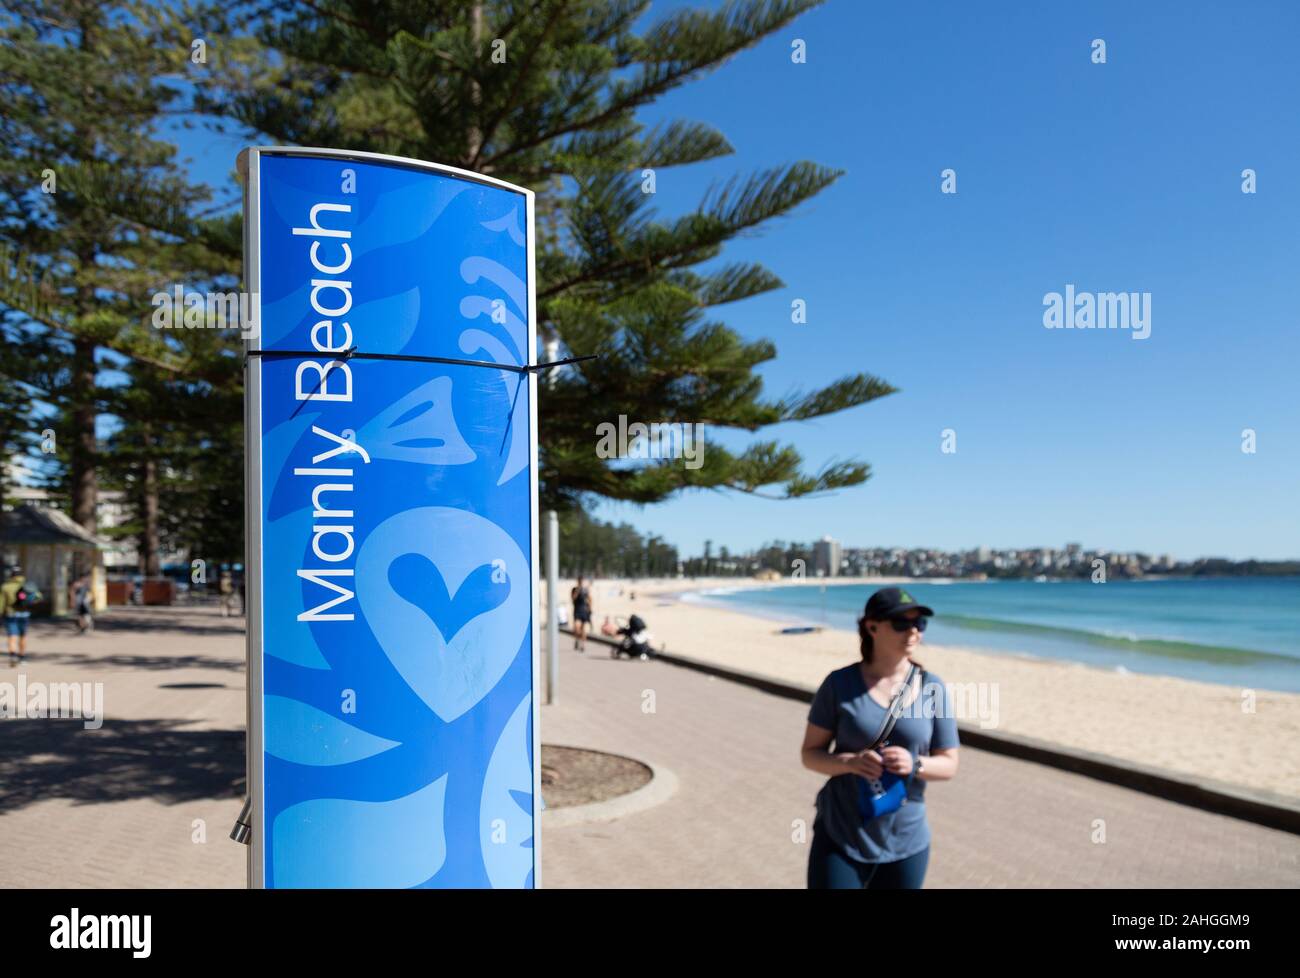 Manly beach Sydney Australia on a sunny day in spring Stock Photo